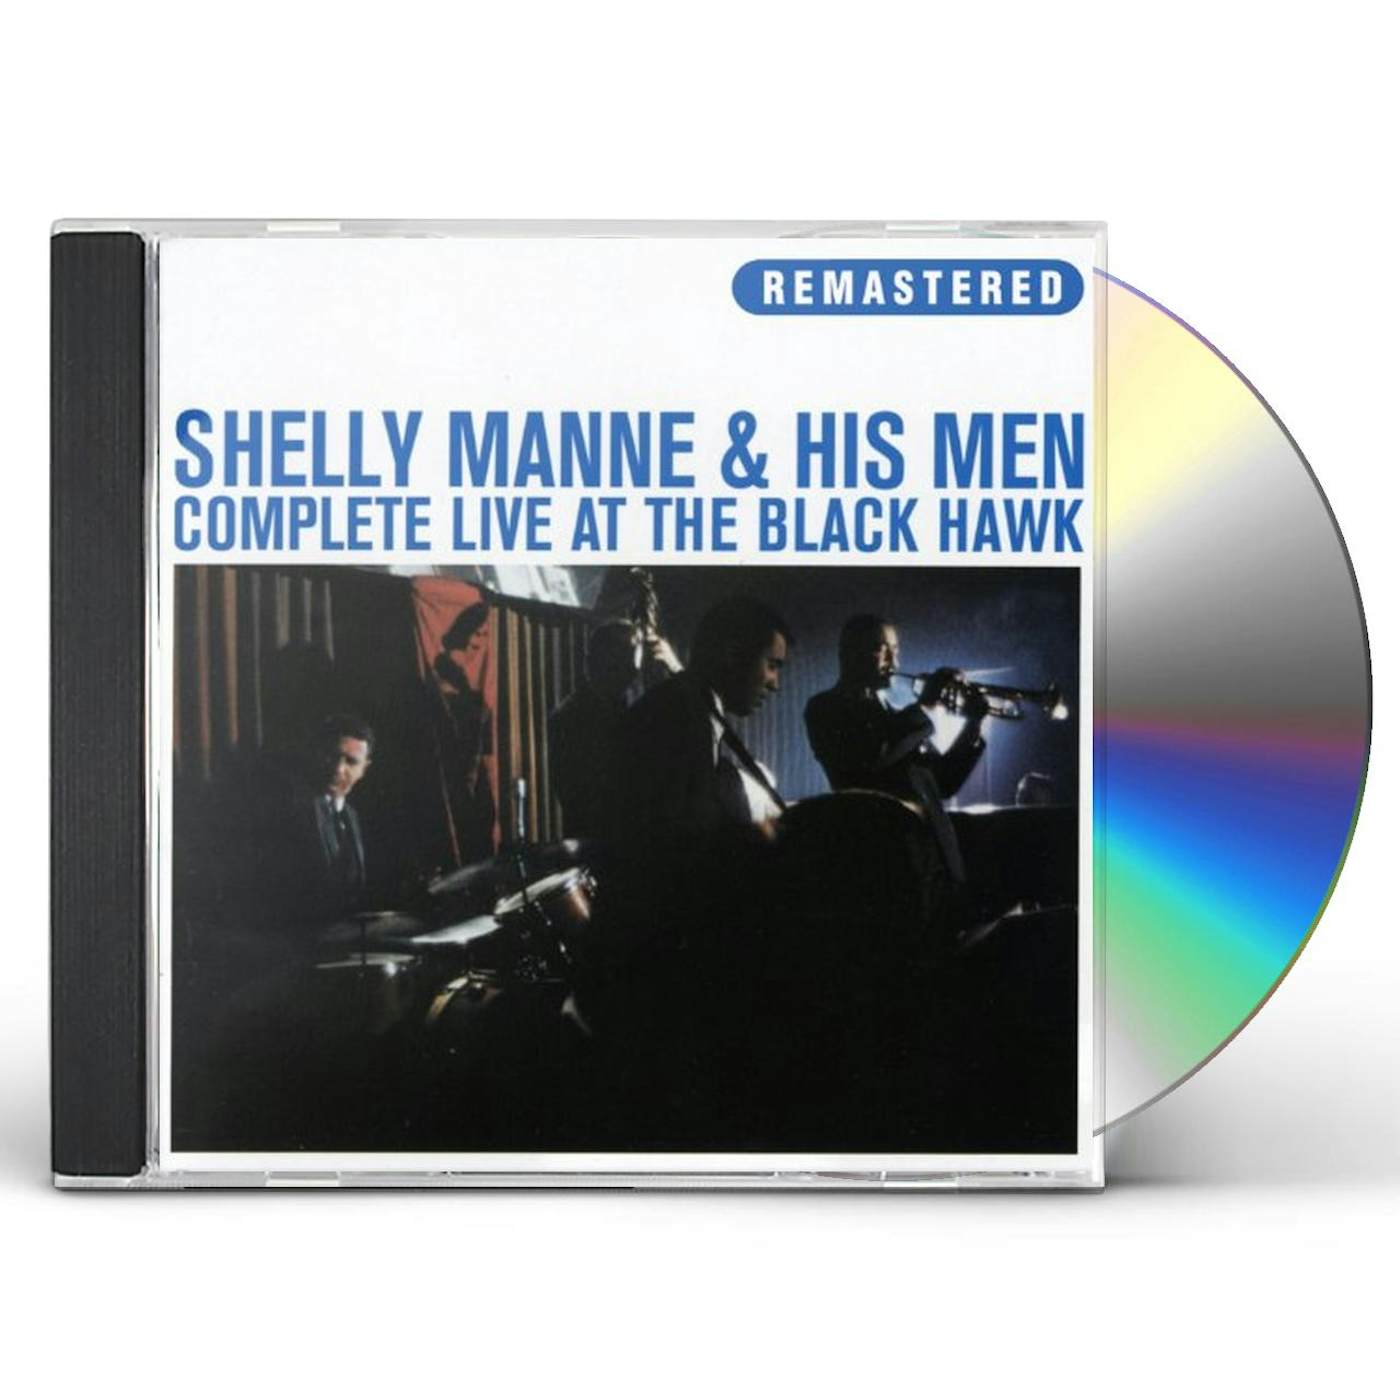 Shelly Manne & His Men COMPLETE LIVE AT THE BLACK HAWK CD